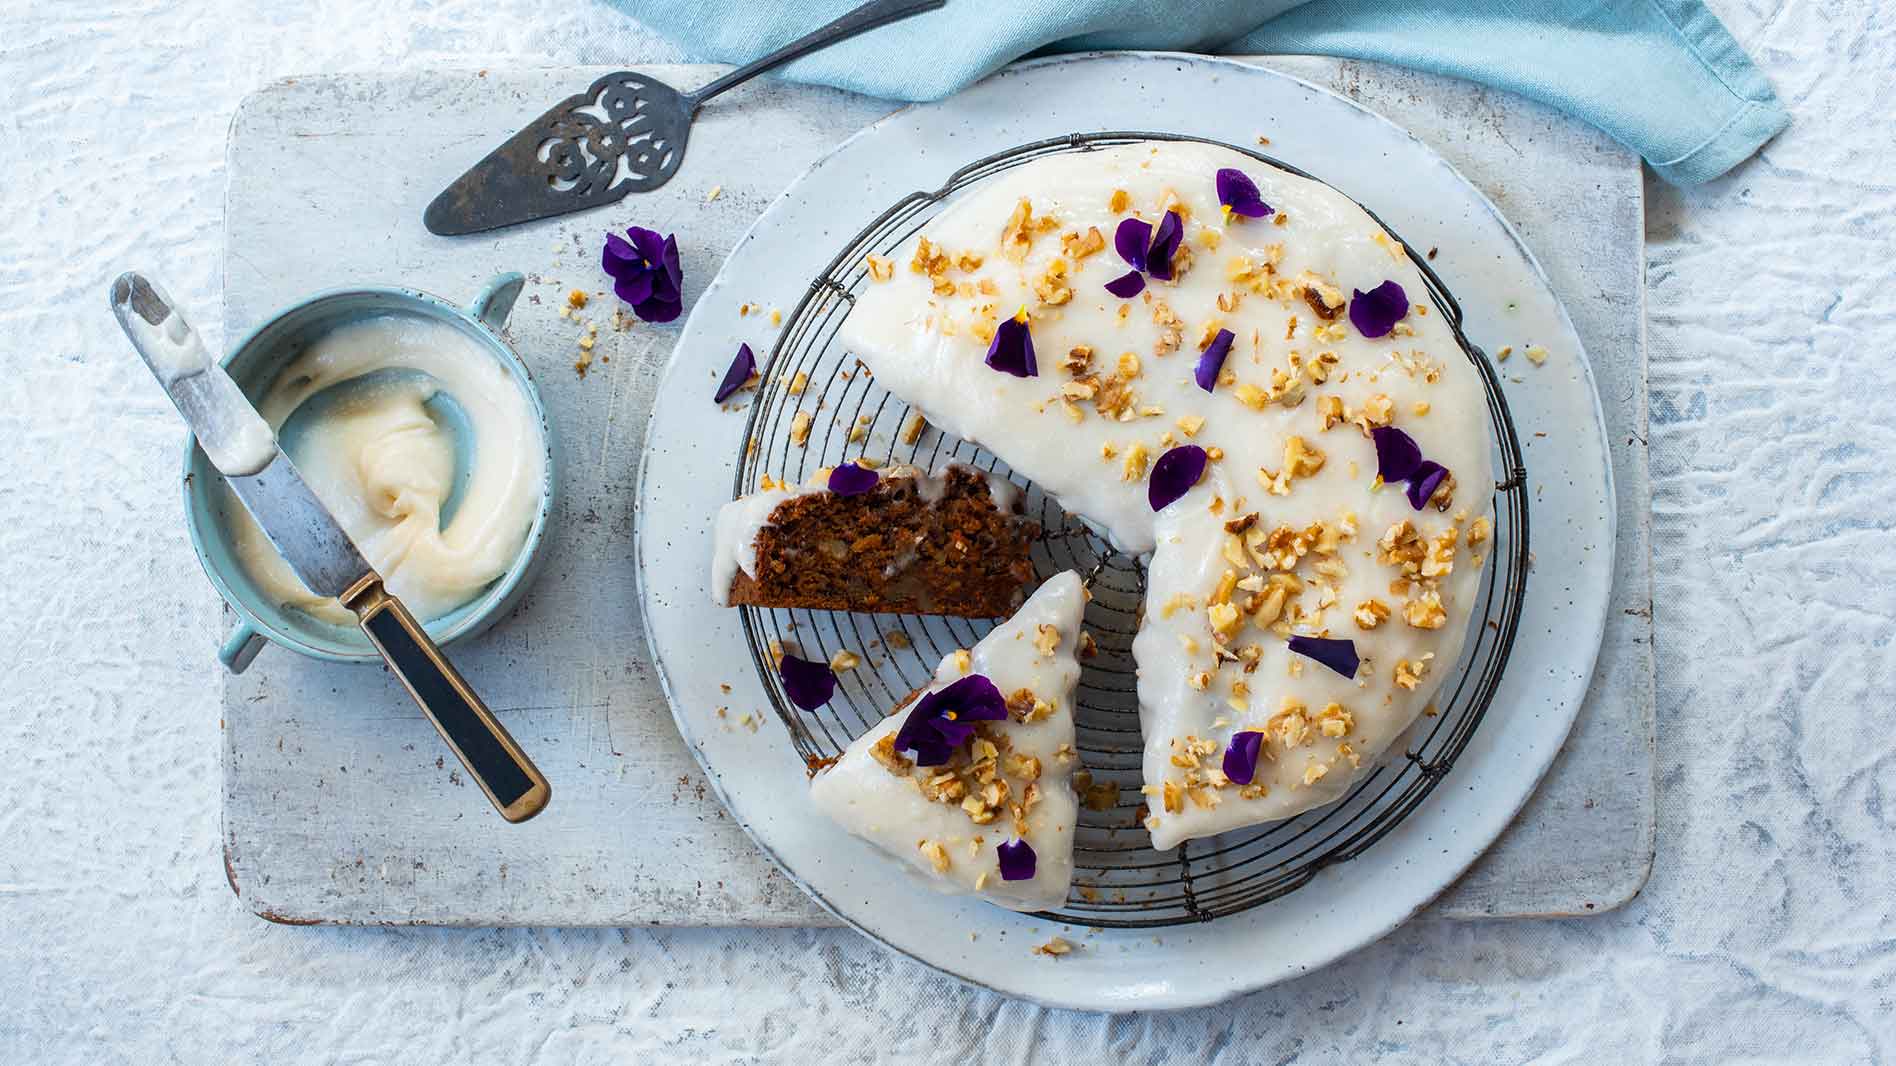 Carrot Cake With Vegan Cream Cheese Frosting